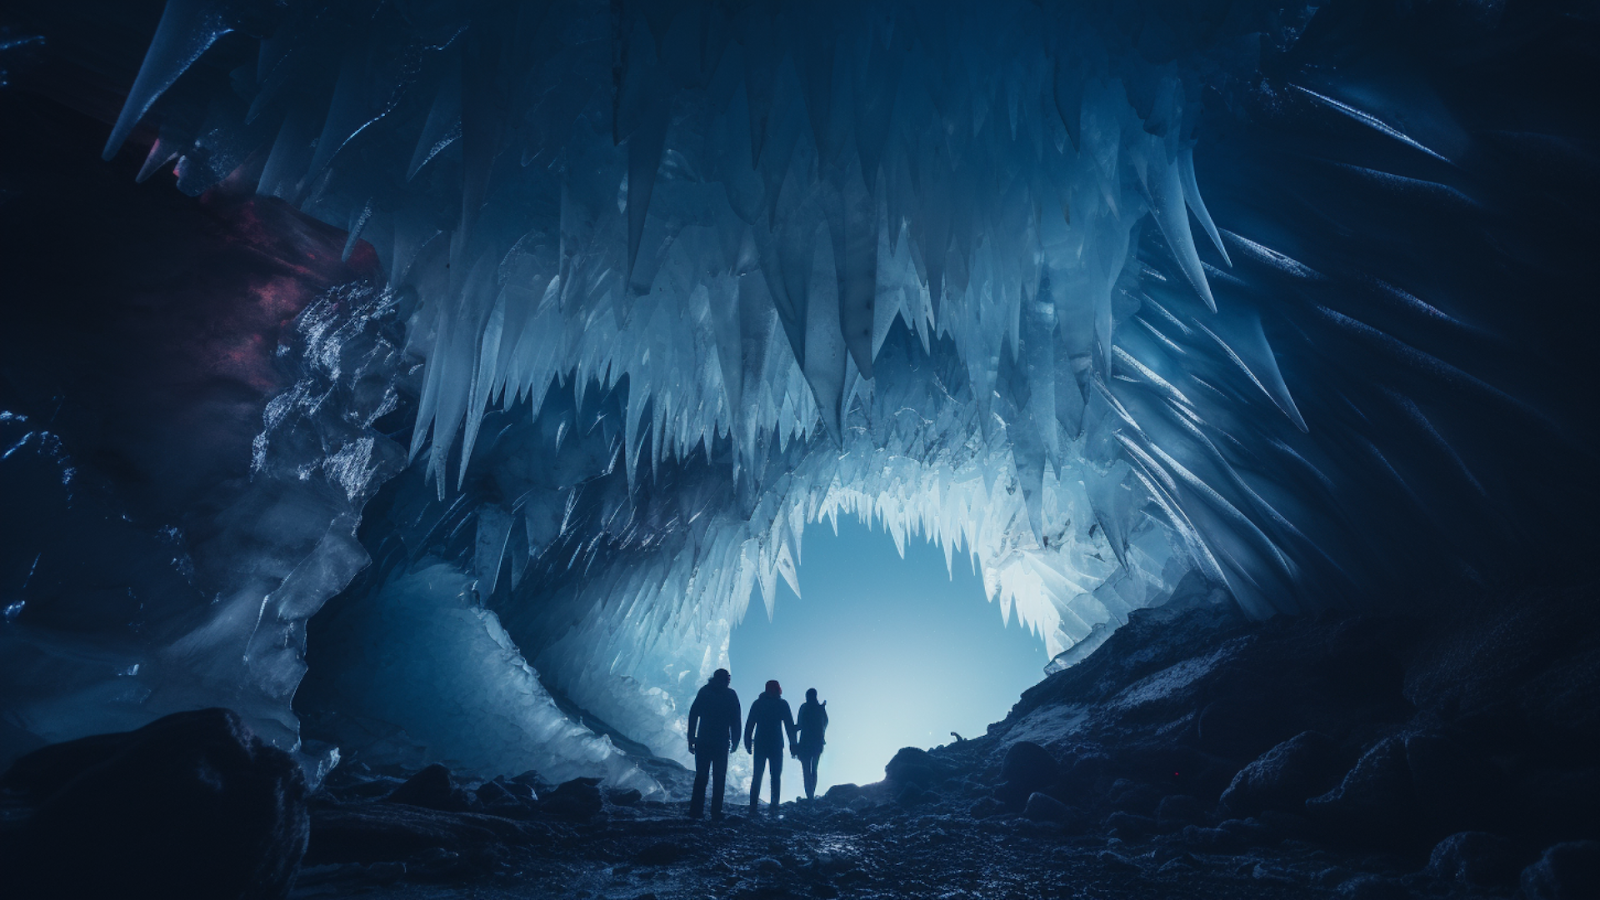 Adventurers stand inside of an ethereal ice cave on the Apostle Islands, a marvel of the frozen river landscapes of Lake Superior.